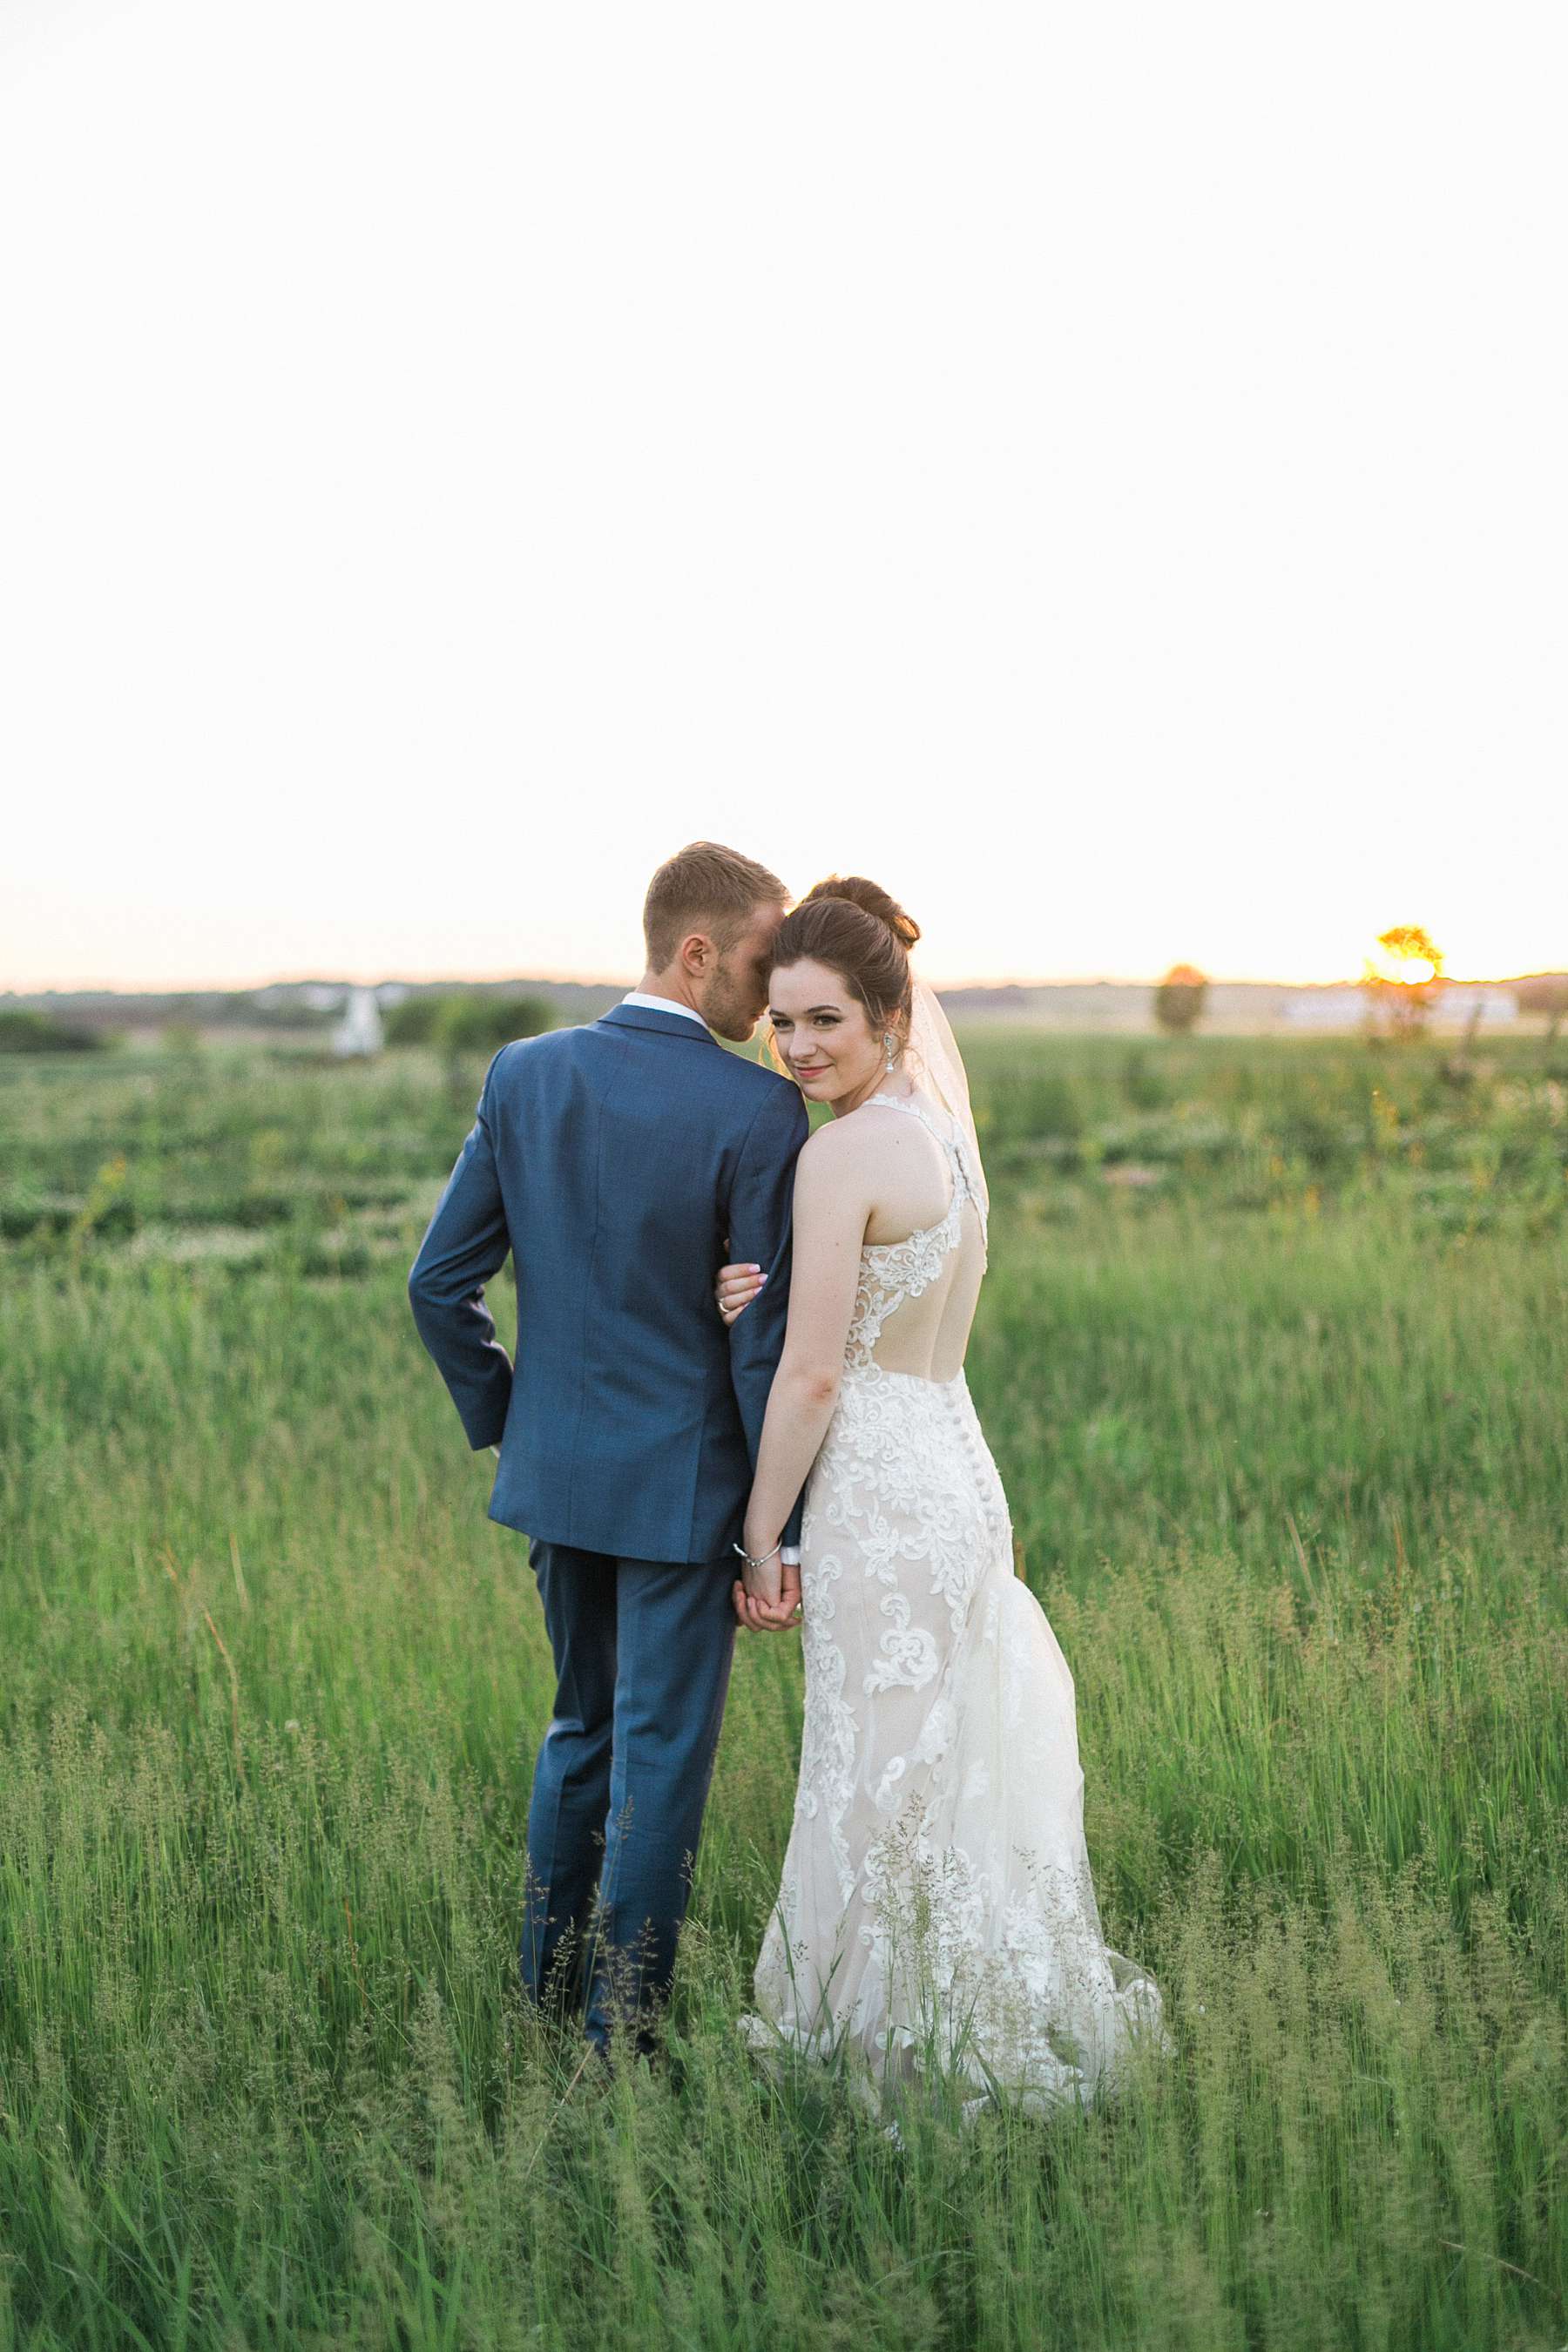 sunset bride and groom portrait, rustic romantic wedding at the landing 1841, photo by laurelyn savannah photography